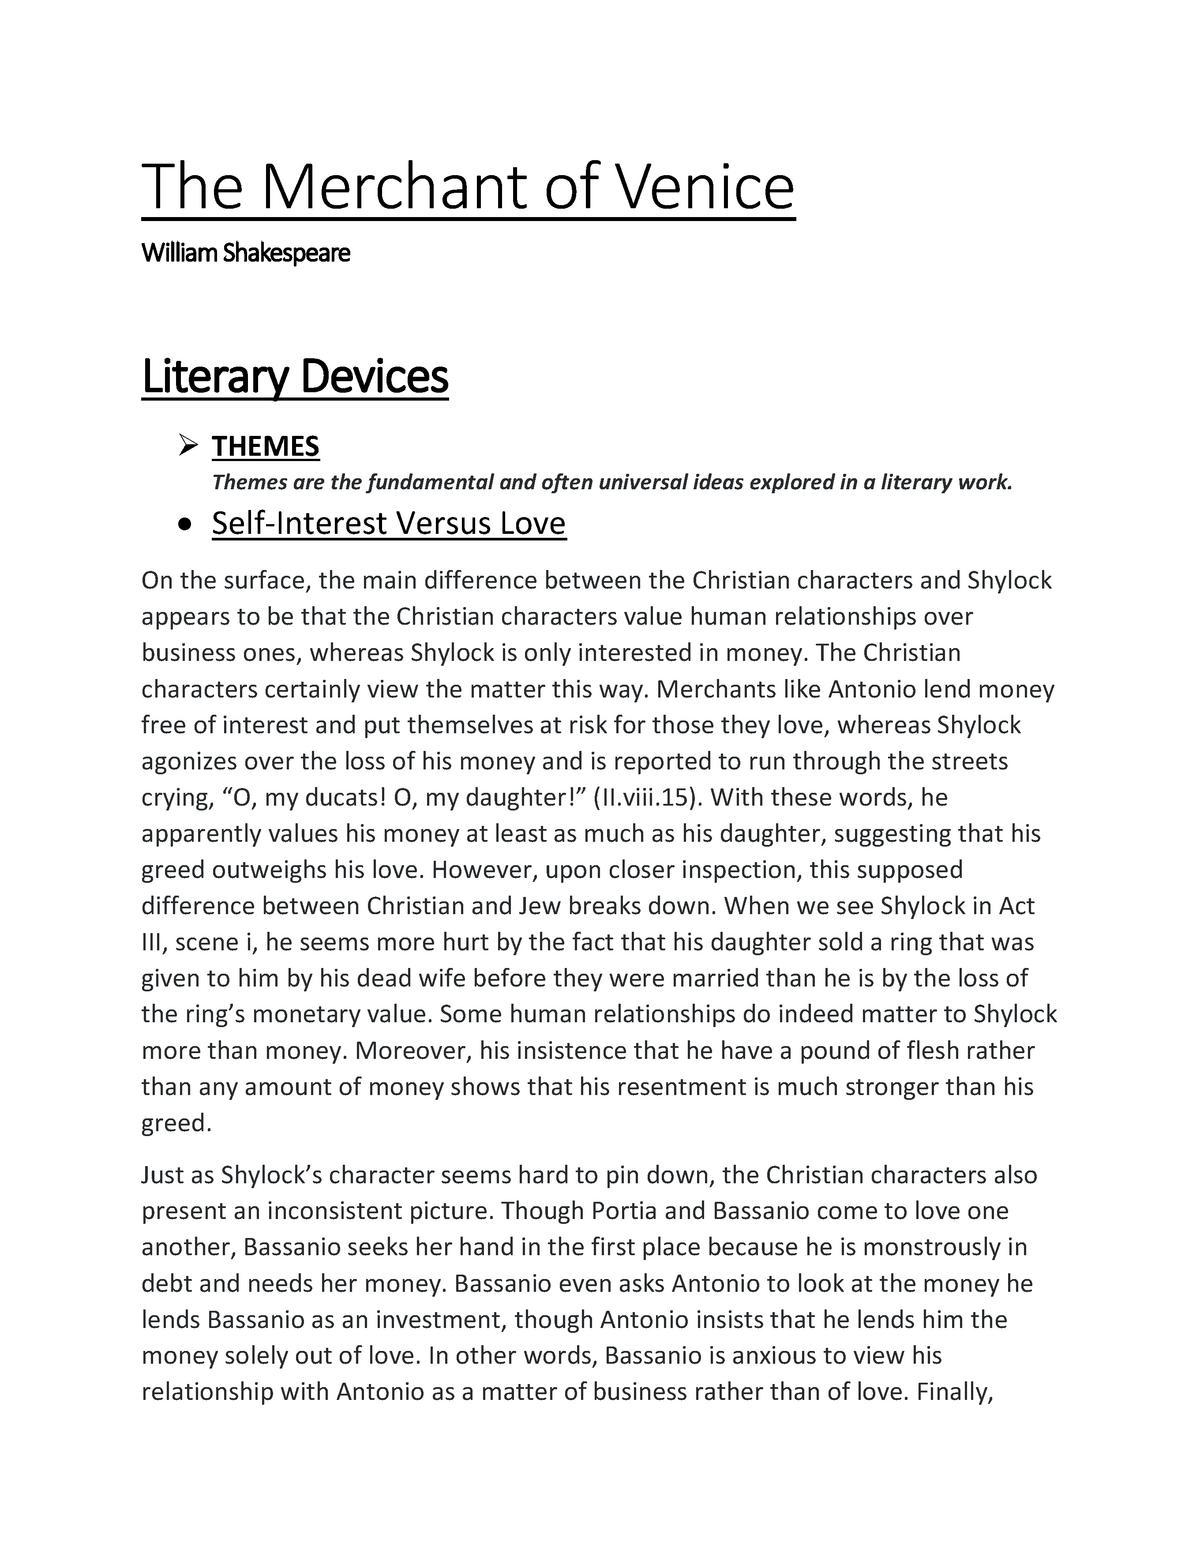 role of female characters in merchant of venice essay